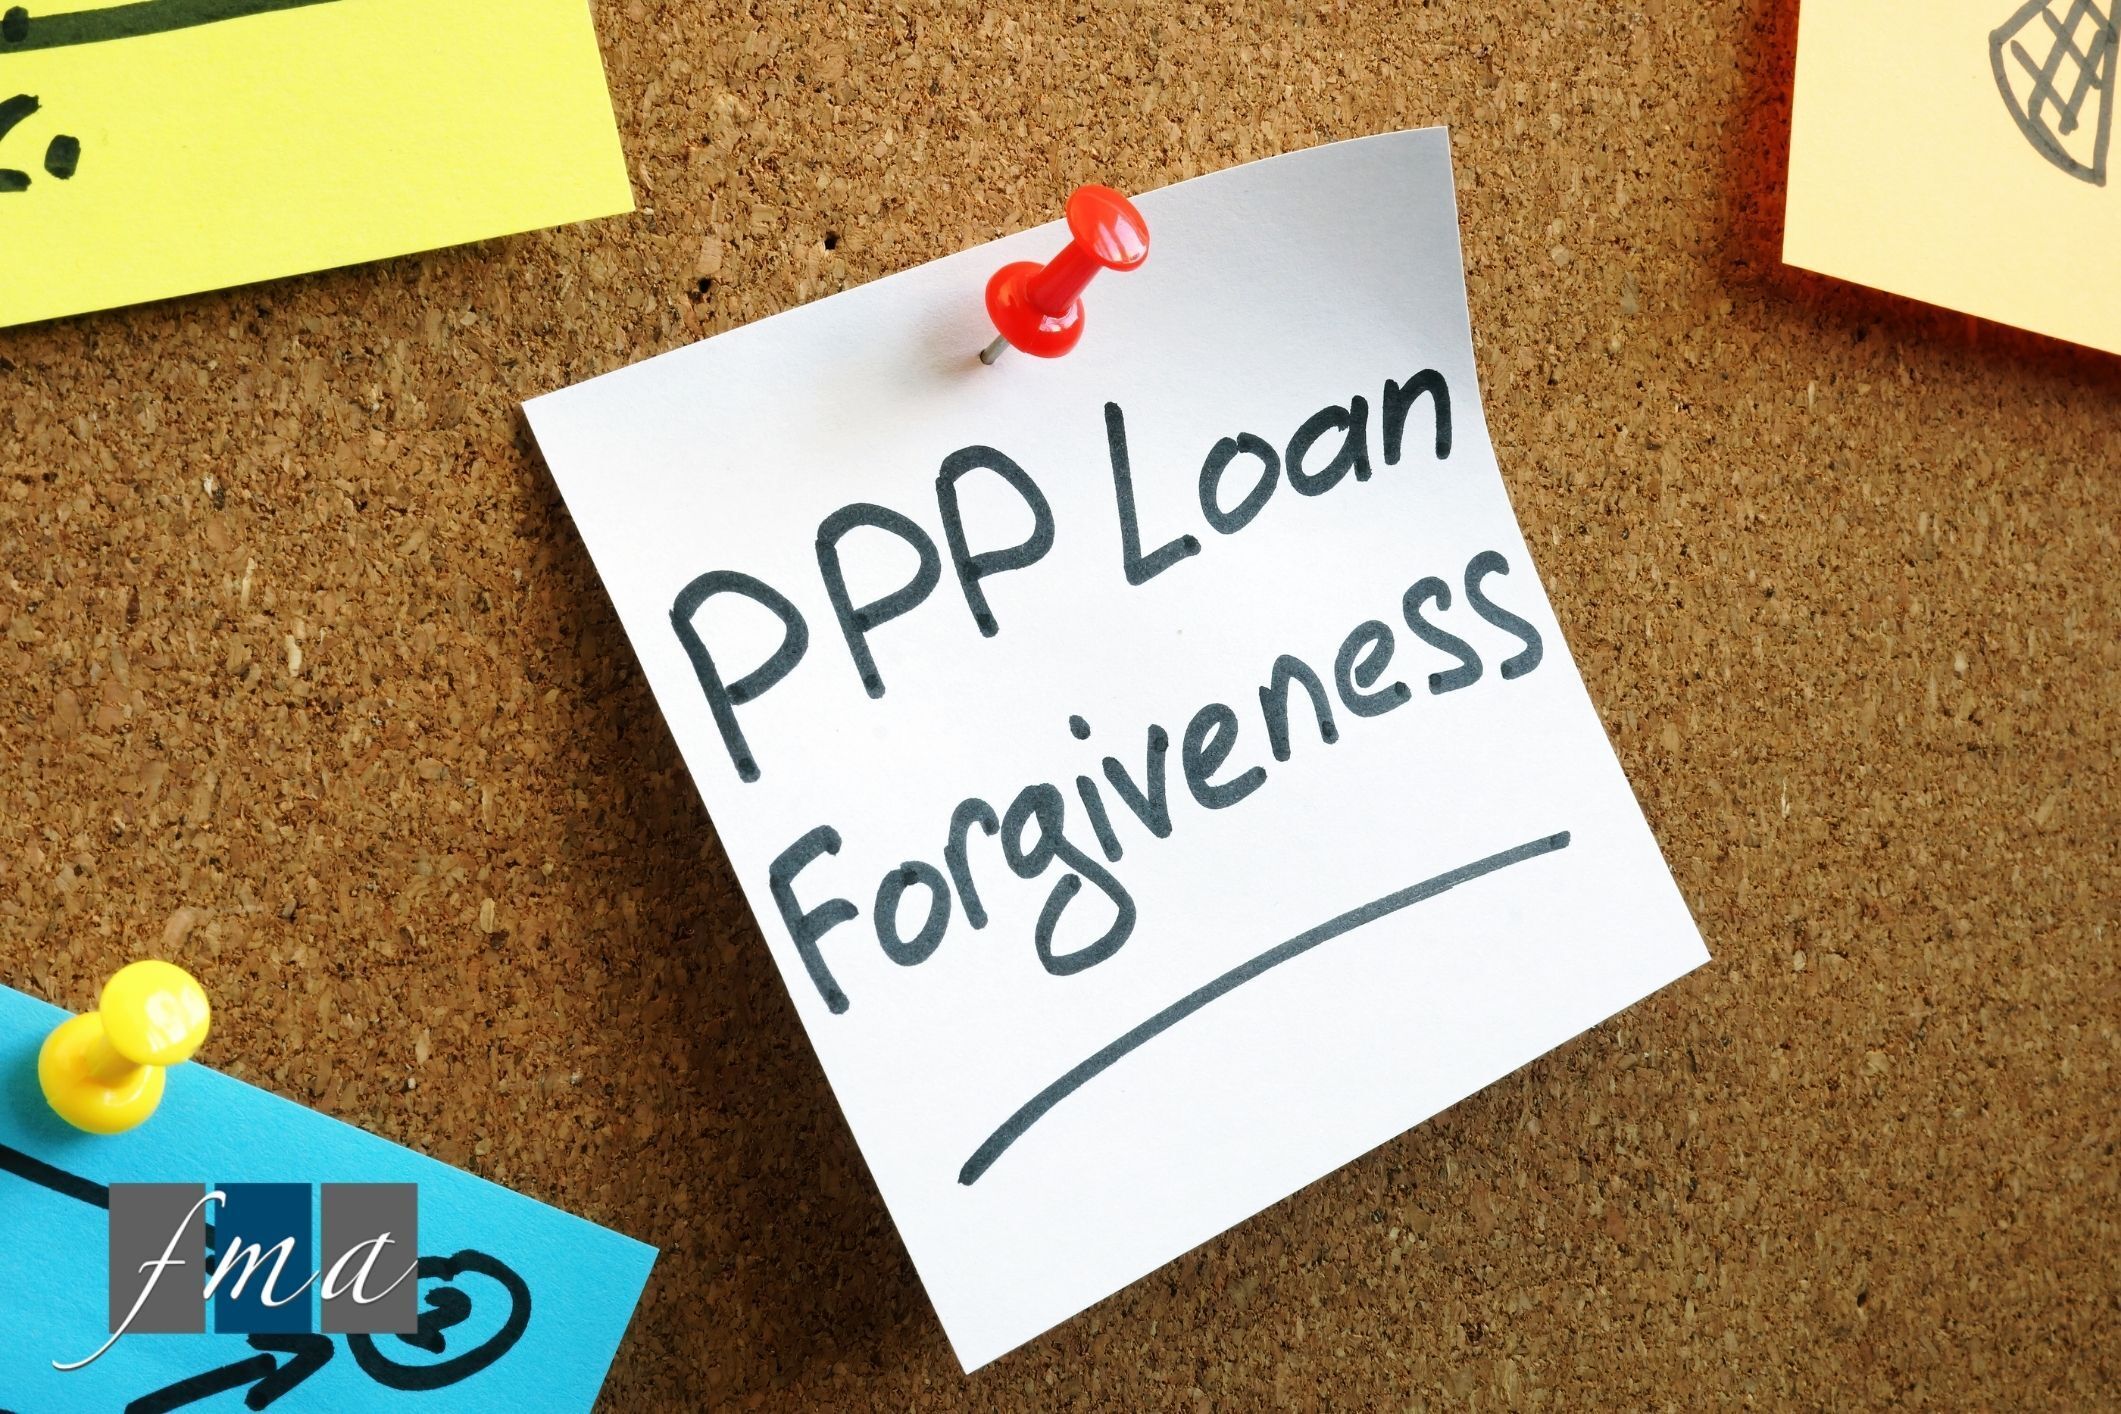 ppp-loan-forgiveness-guidelines